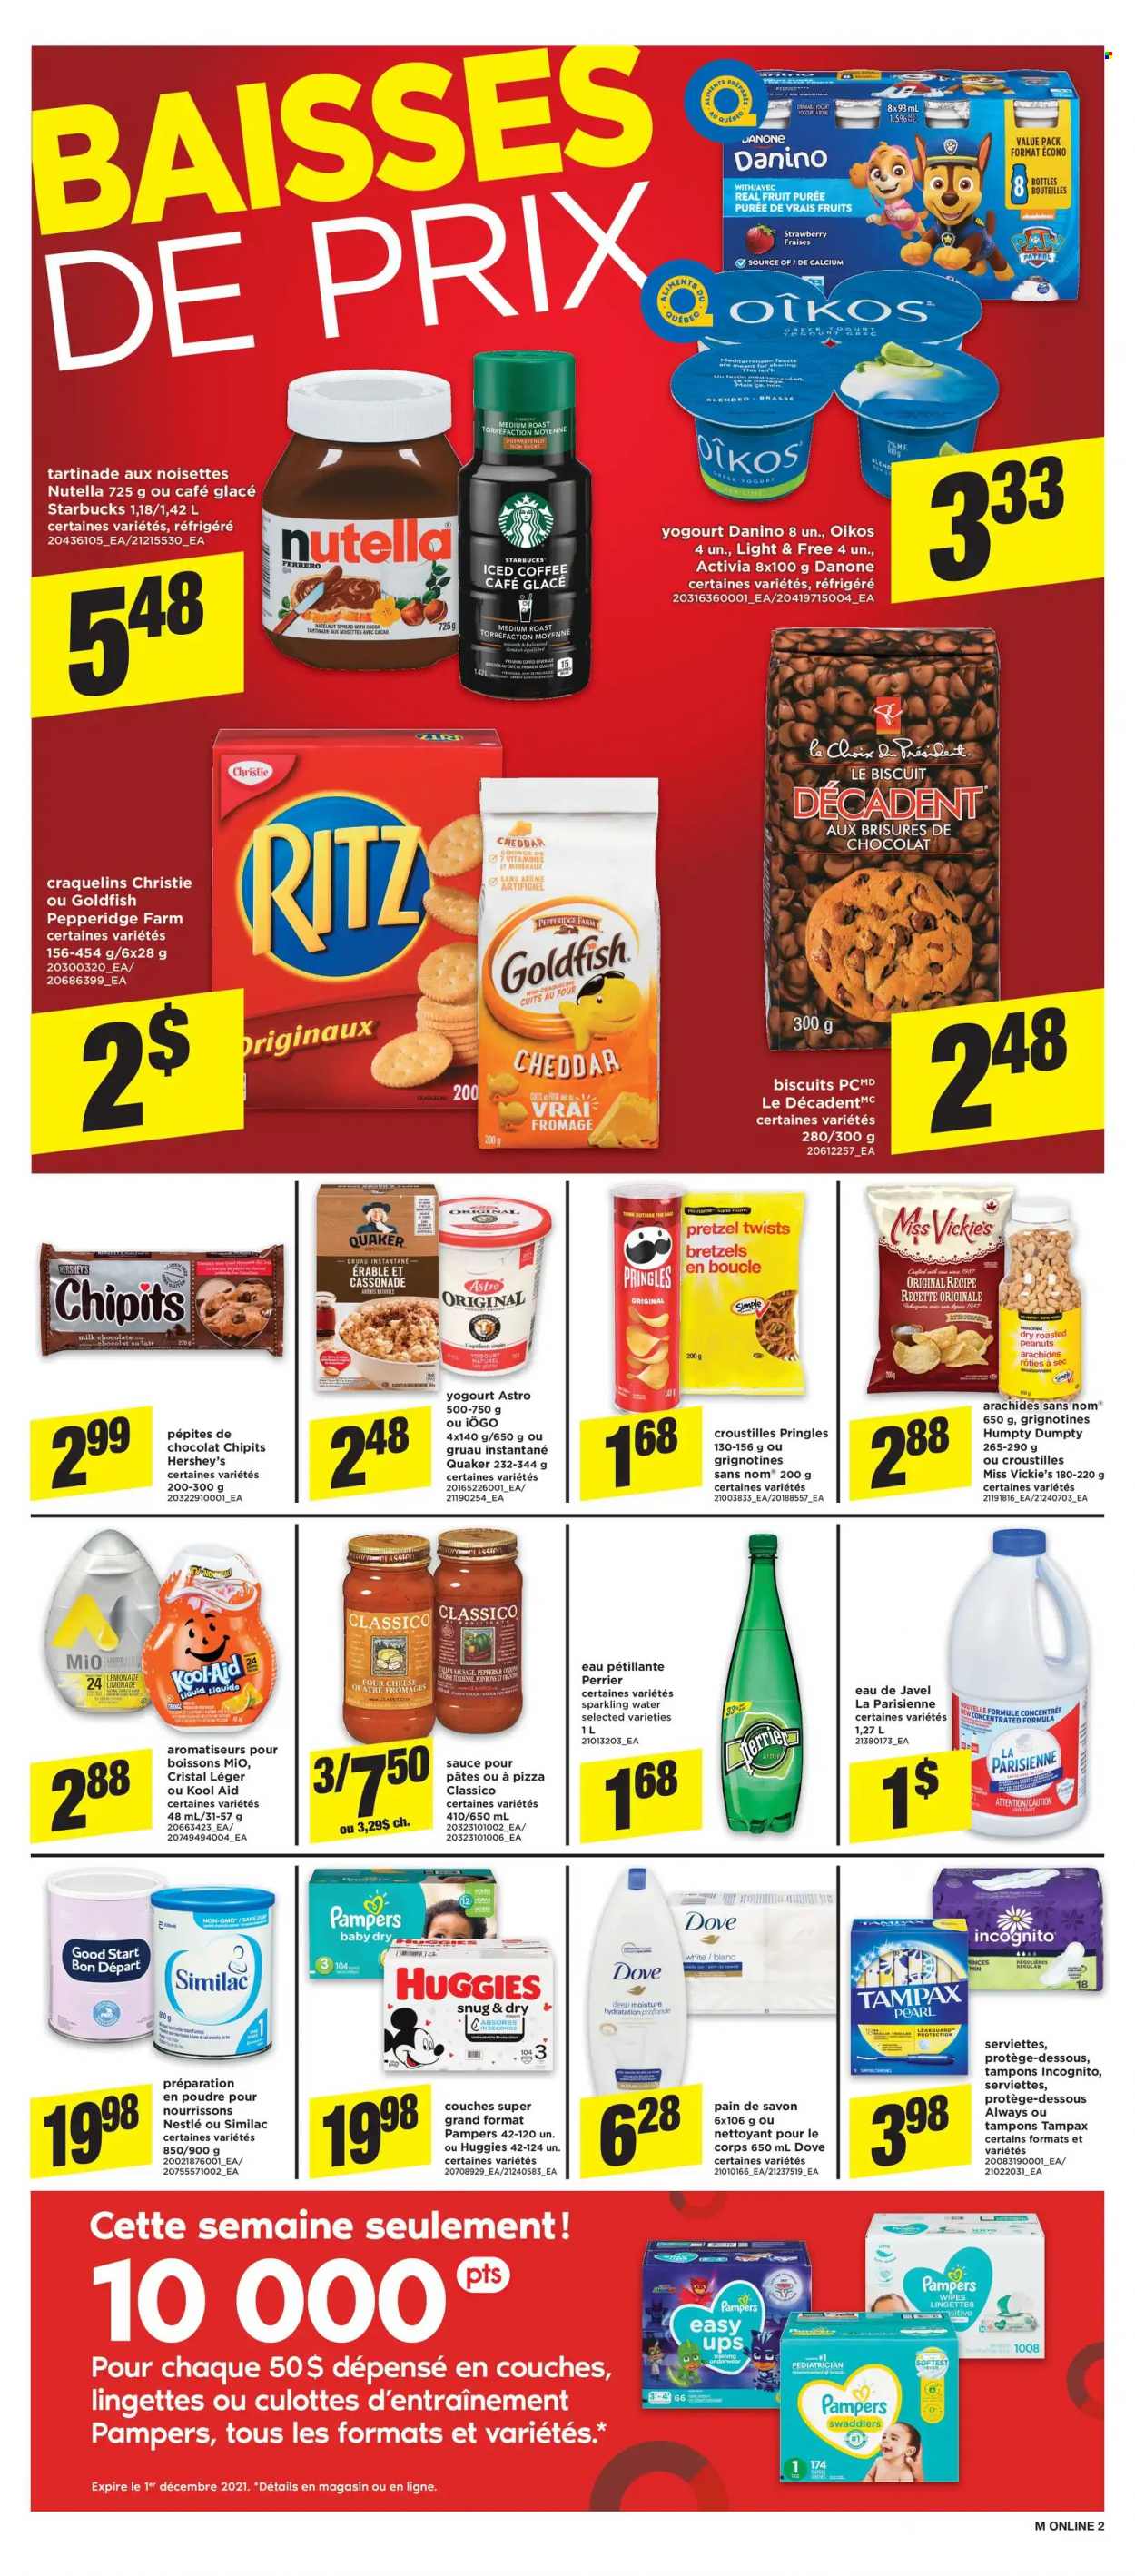 thumbnail - Maxi & Cie Flyer - November 25, 2021 - December 01, 2021 - Sales products - pretzels, No Name, pizza, sauce, Quaker, sausage, yoghurt, Activia, Oikos, Hershey's, milk chocolate, chocolate, biscuit, RITZ, Pringles, cheddar biscuits, Goldfish, Classico, roasted peanuts, peanuts, lemonade, Perrier, sparkling water, iced coffee, Starbucks, Similac, wipes, tampons, Danone, Nestlé, calcium, Dove, kool aid, Tampax, Huggies, Pampers, Nutella, Ferrero Rocher. Page 7.